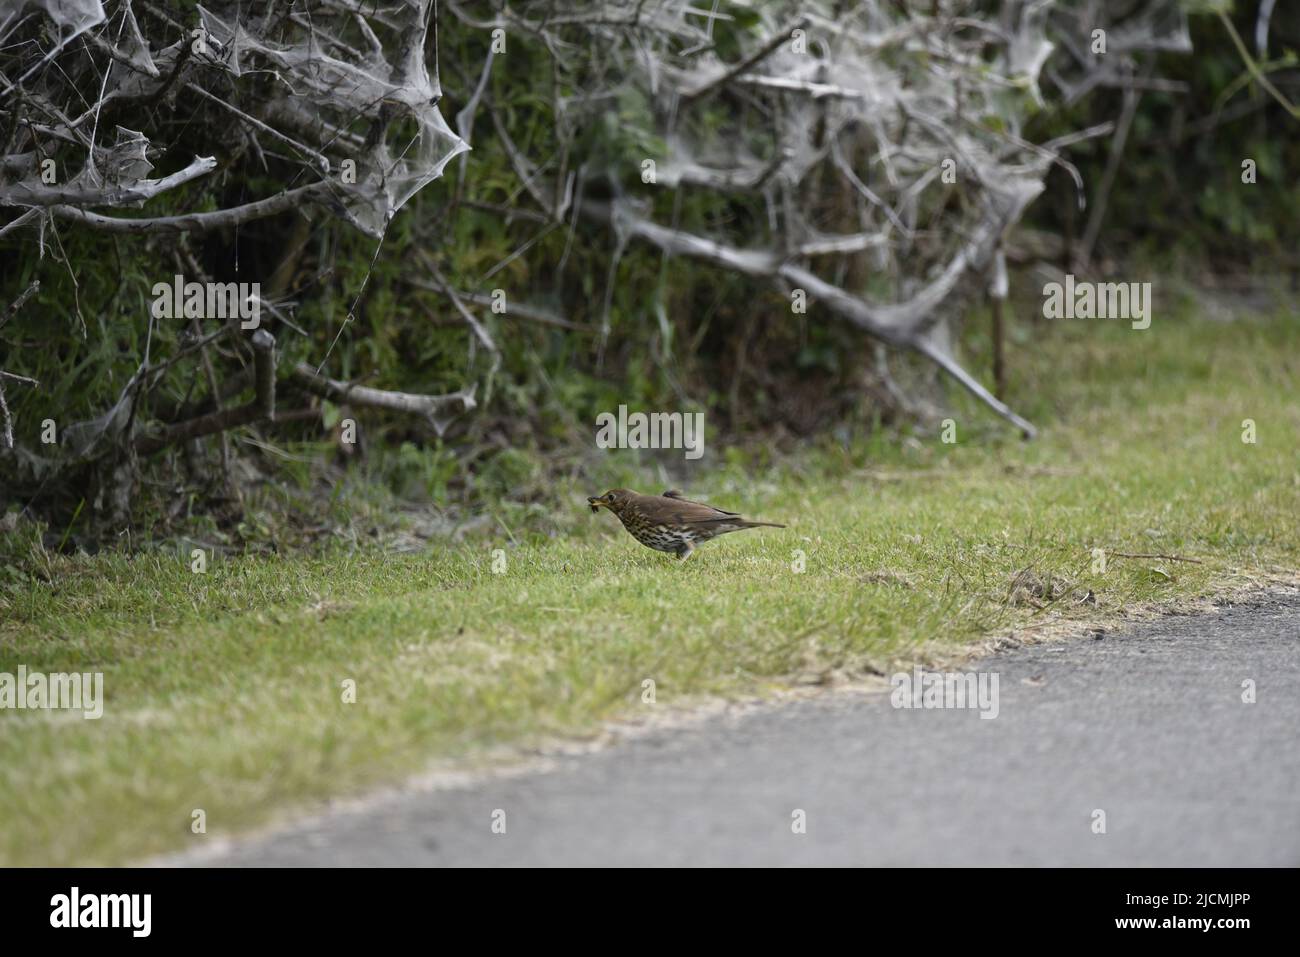 Left-Profile Image of a Song Thrush (Turdus philomelos) Standing on a Grass, Roadside Verge with a Worm in Its Beak, Against a Hedge Background, UK Stock Photo